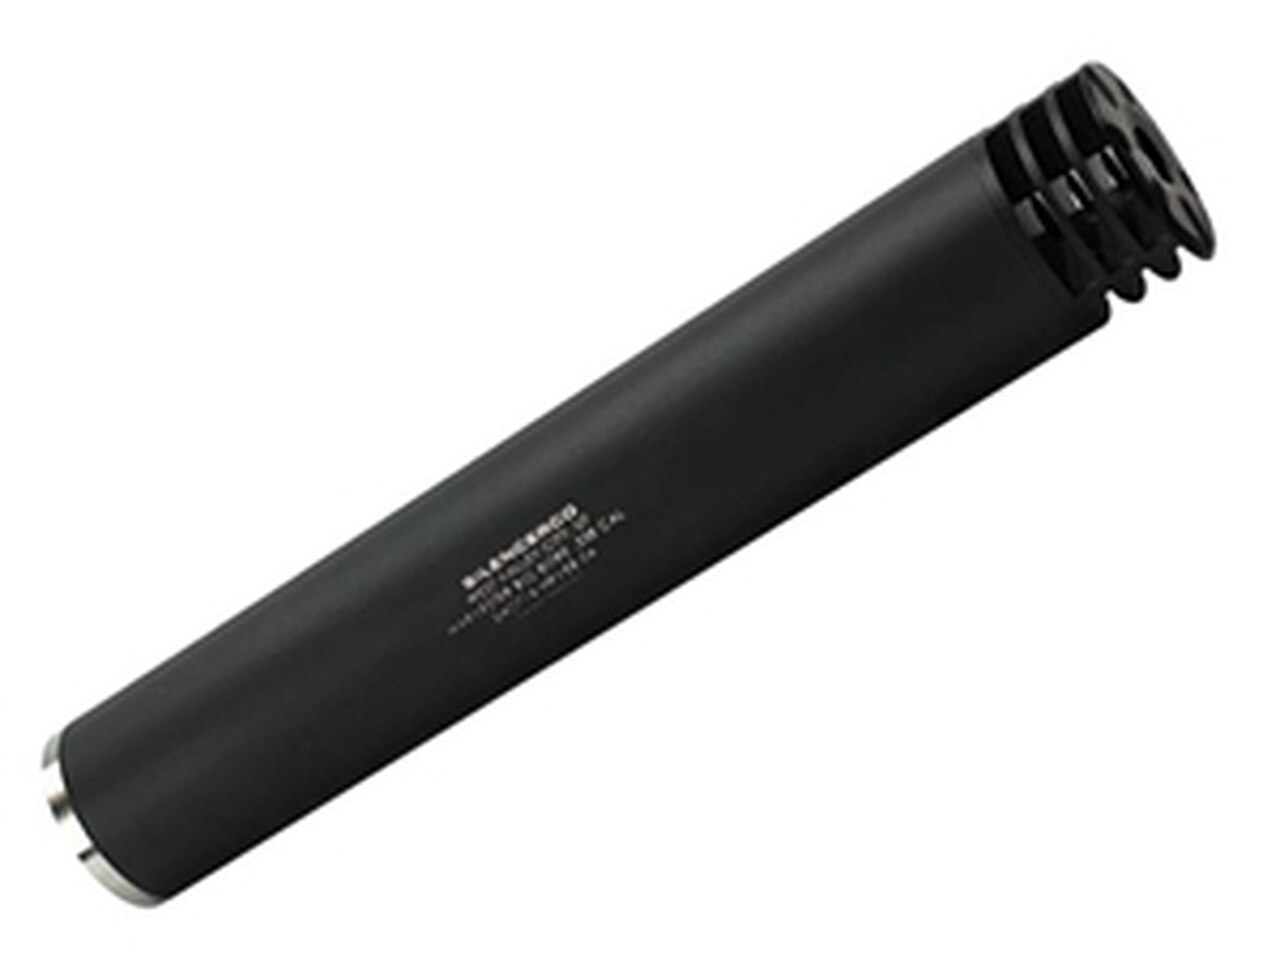 Image of Silencerco Harvester Big Bore - No Mount .338 Lapua Black Anodized - All NFA Rules Apply---USED